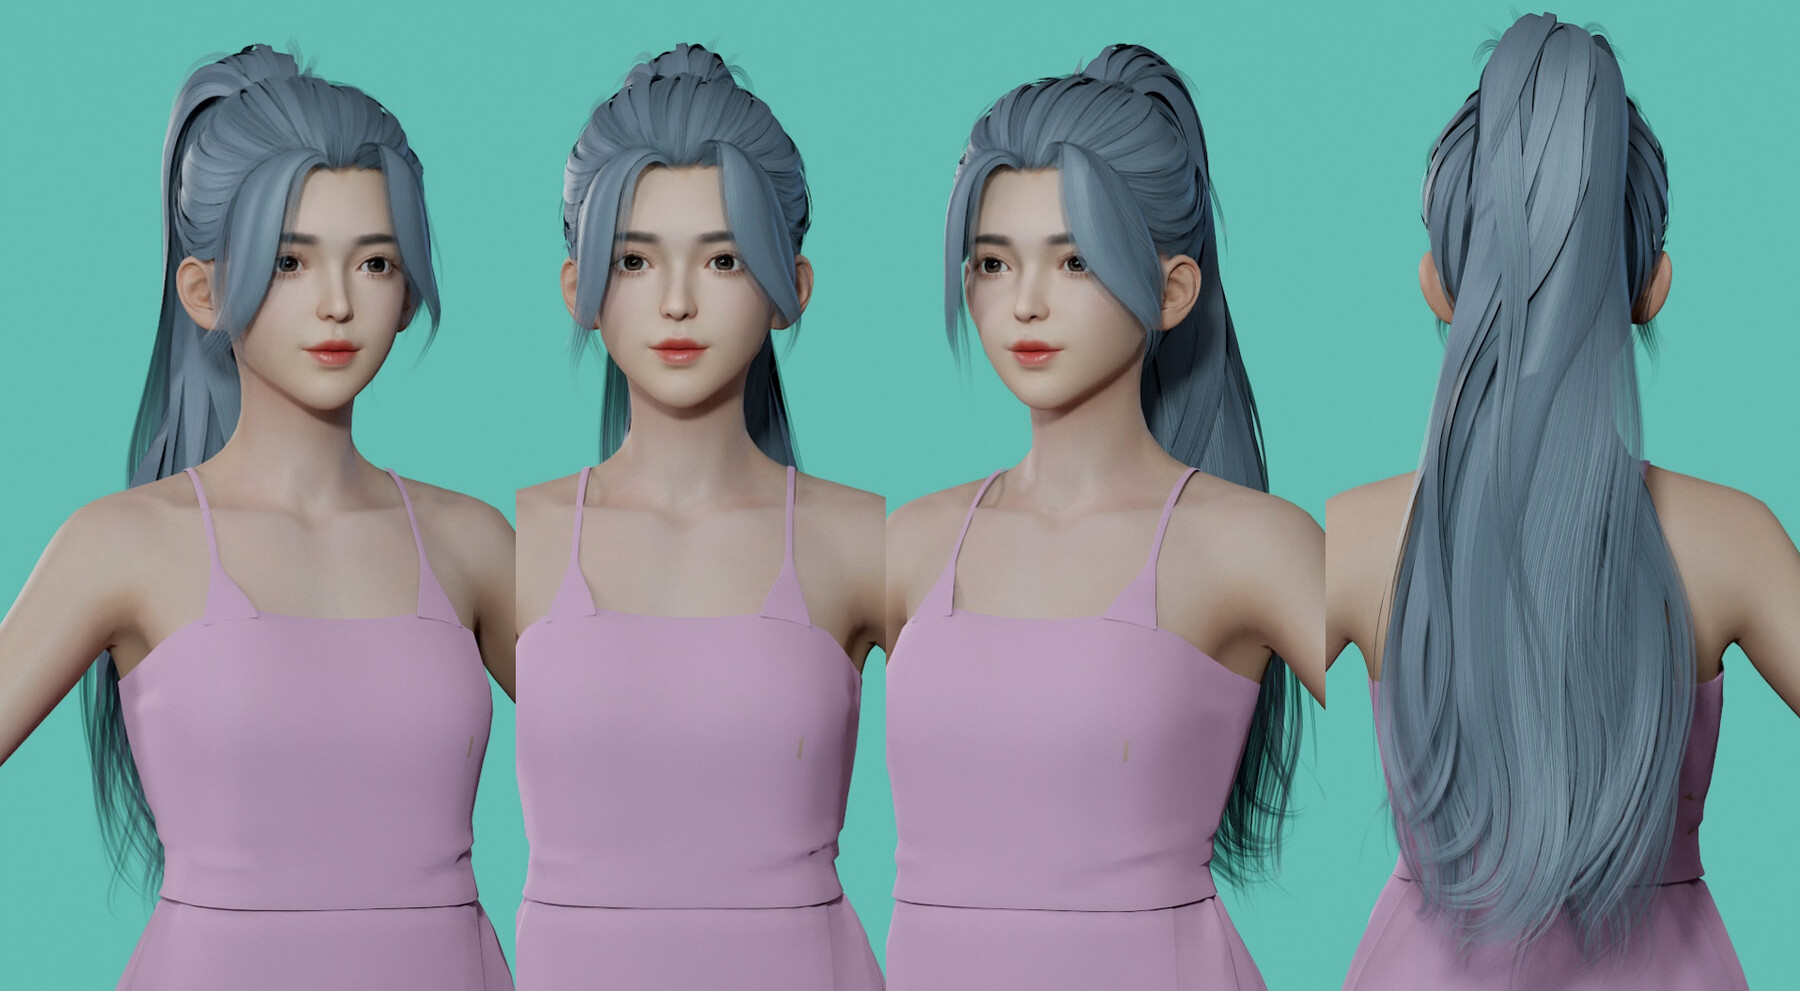 ArtStation - Anime hairstyles for girls: how does the hair we choose affect  our character's image?